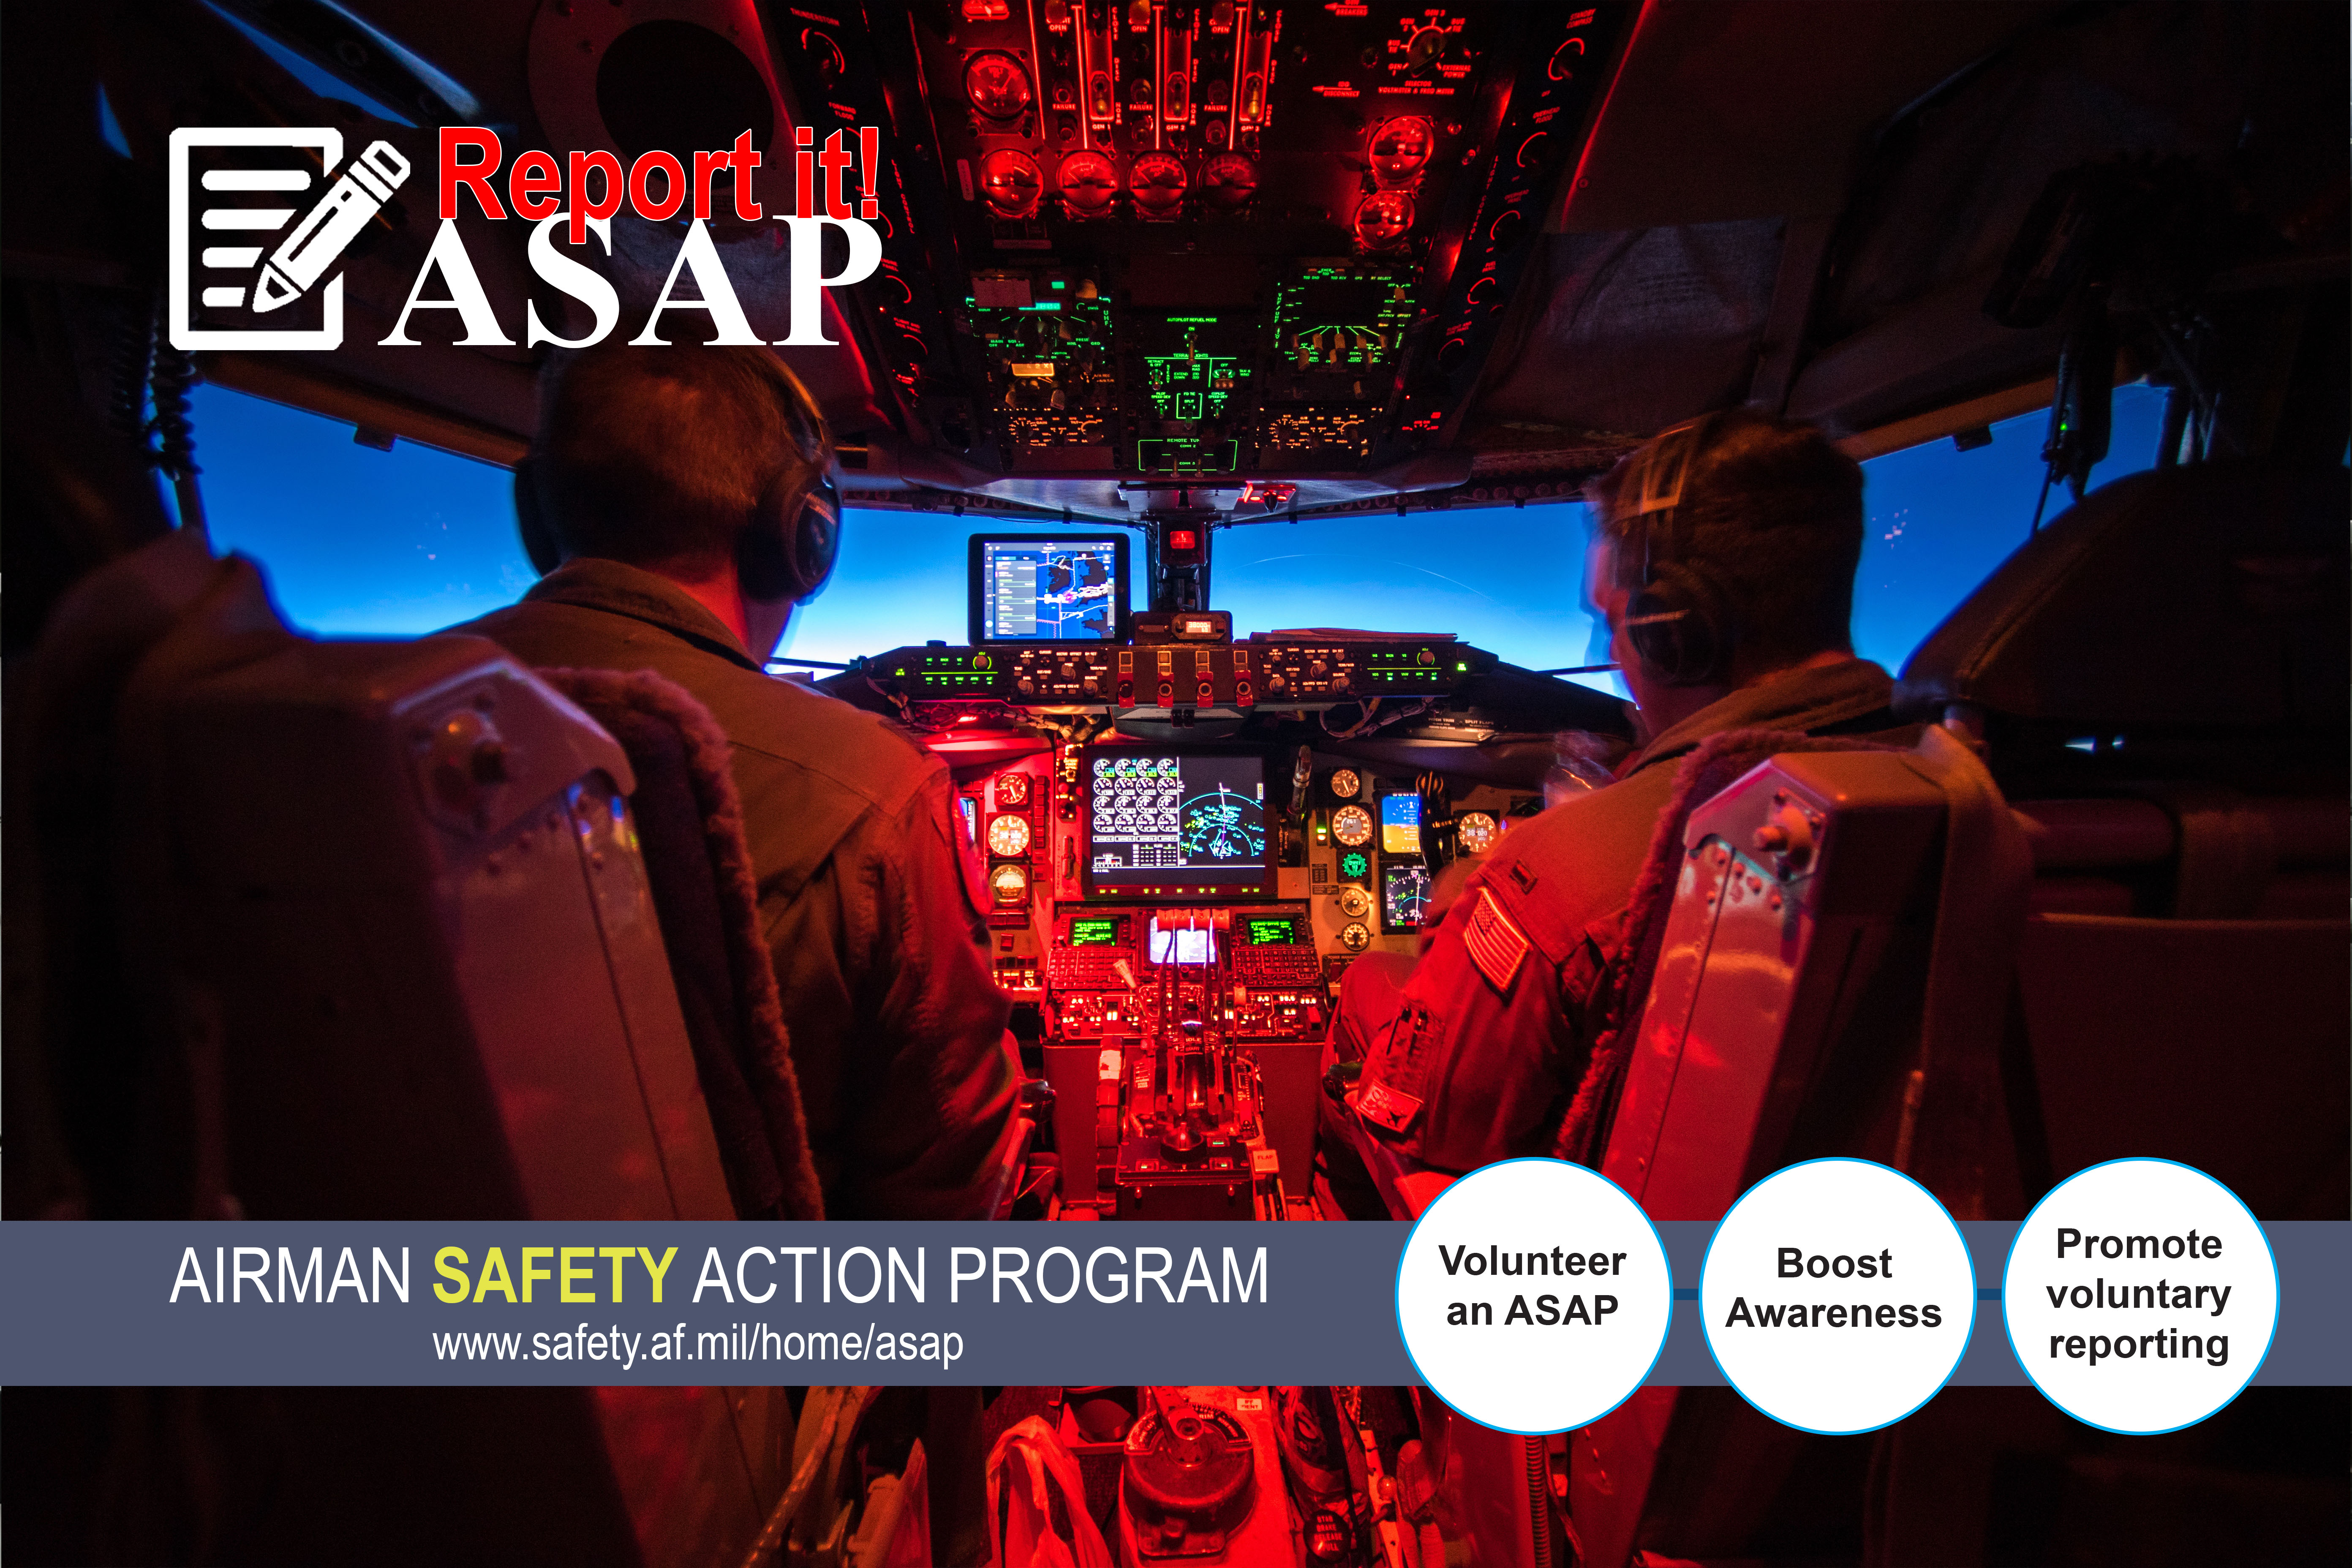 Link to Airman Safety Action Program aviation poster